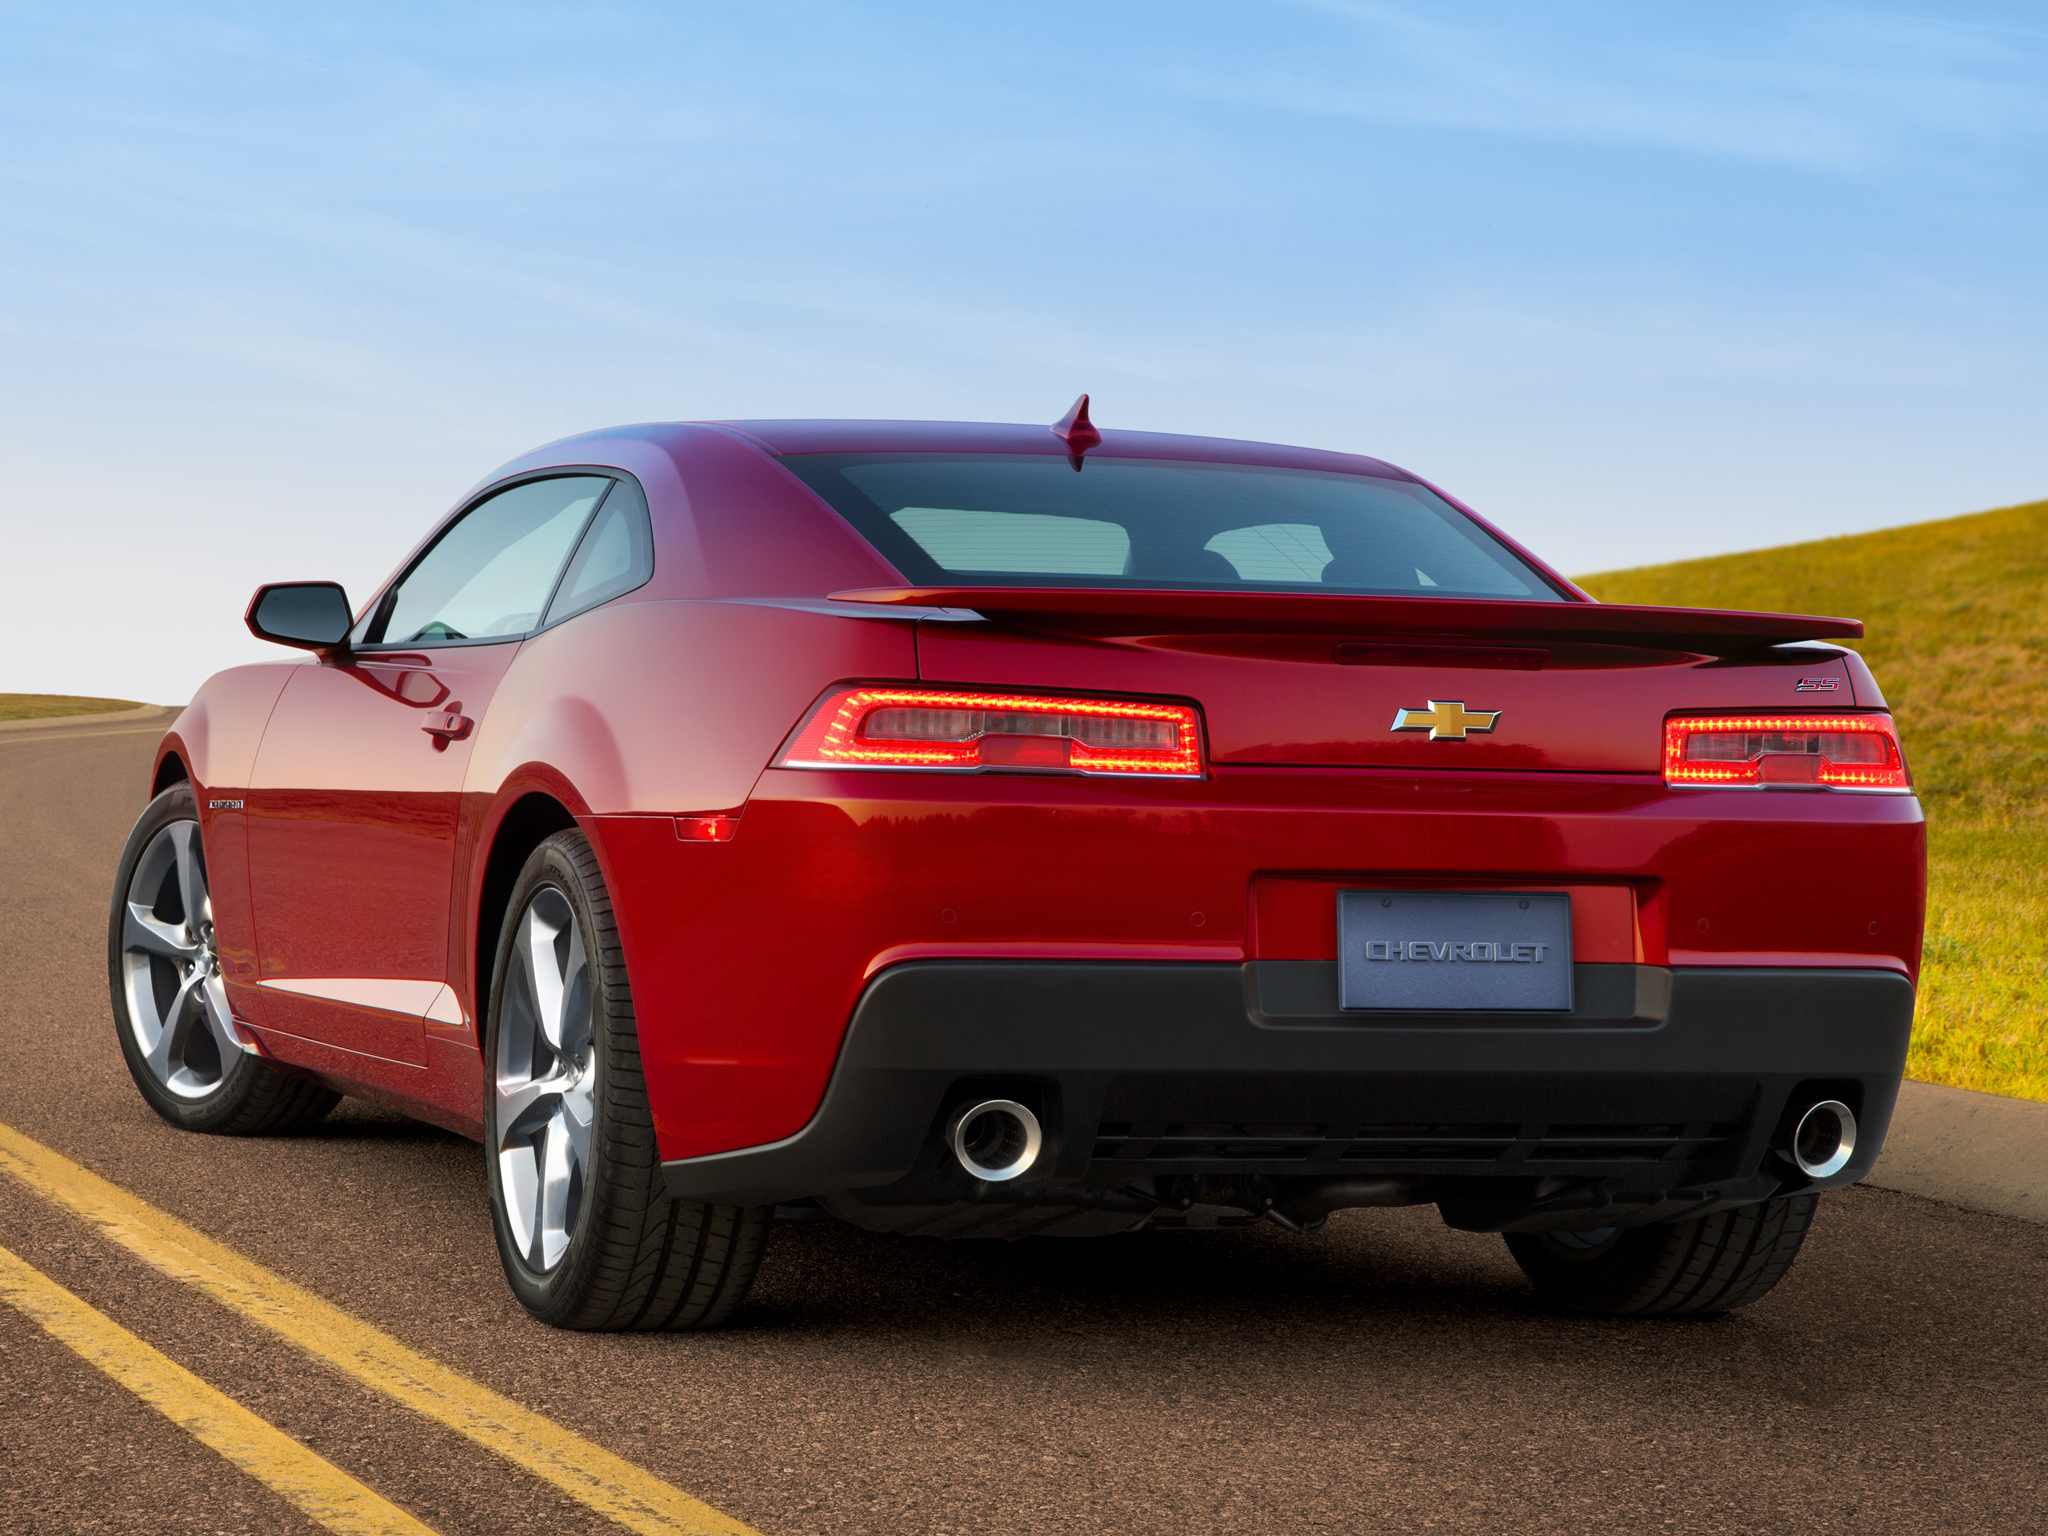 cars, rear view, chevrolet, red, back view, camaro, 2013, ss